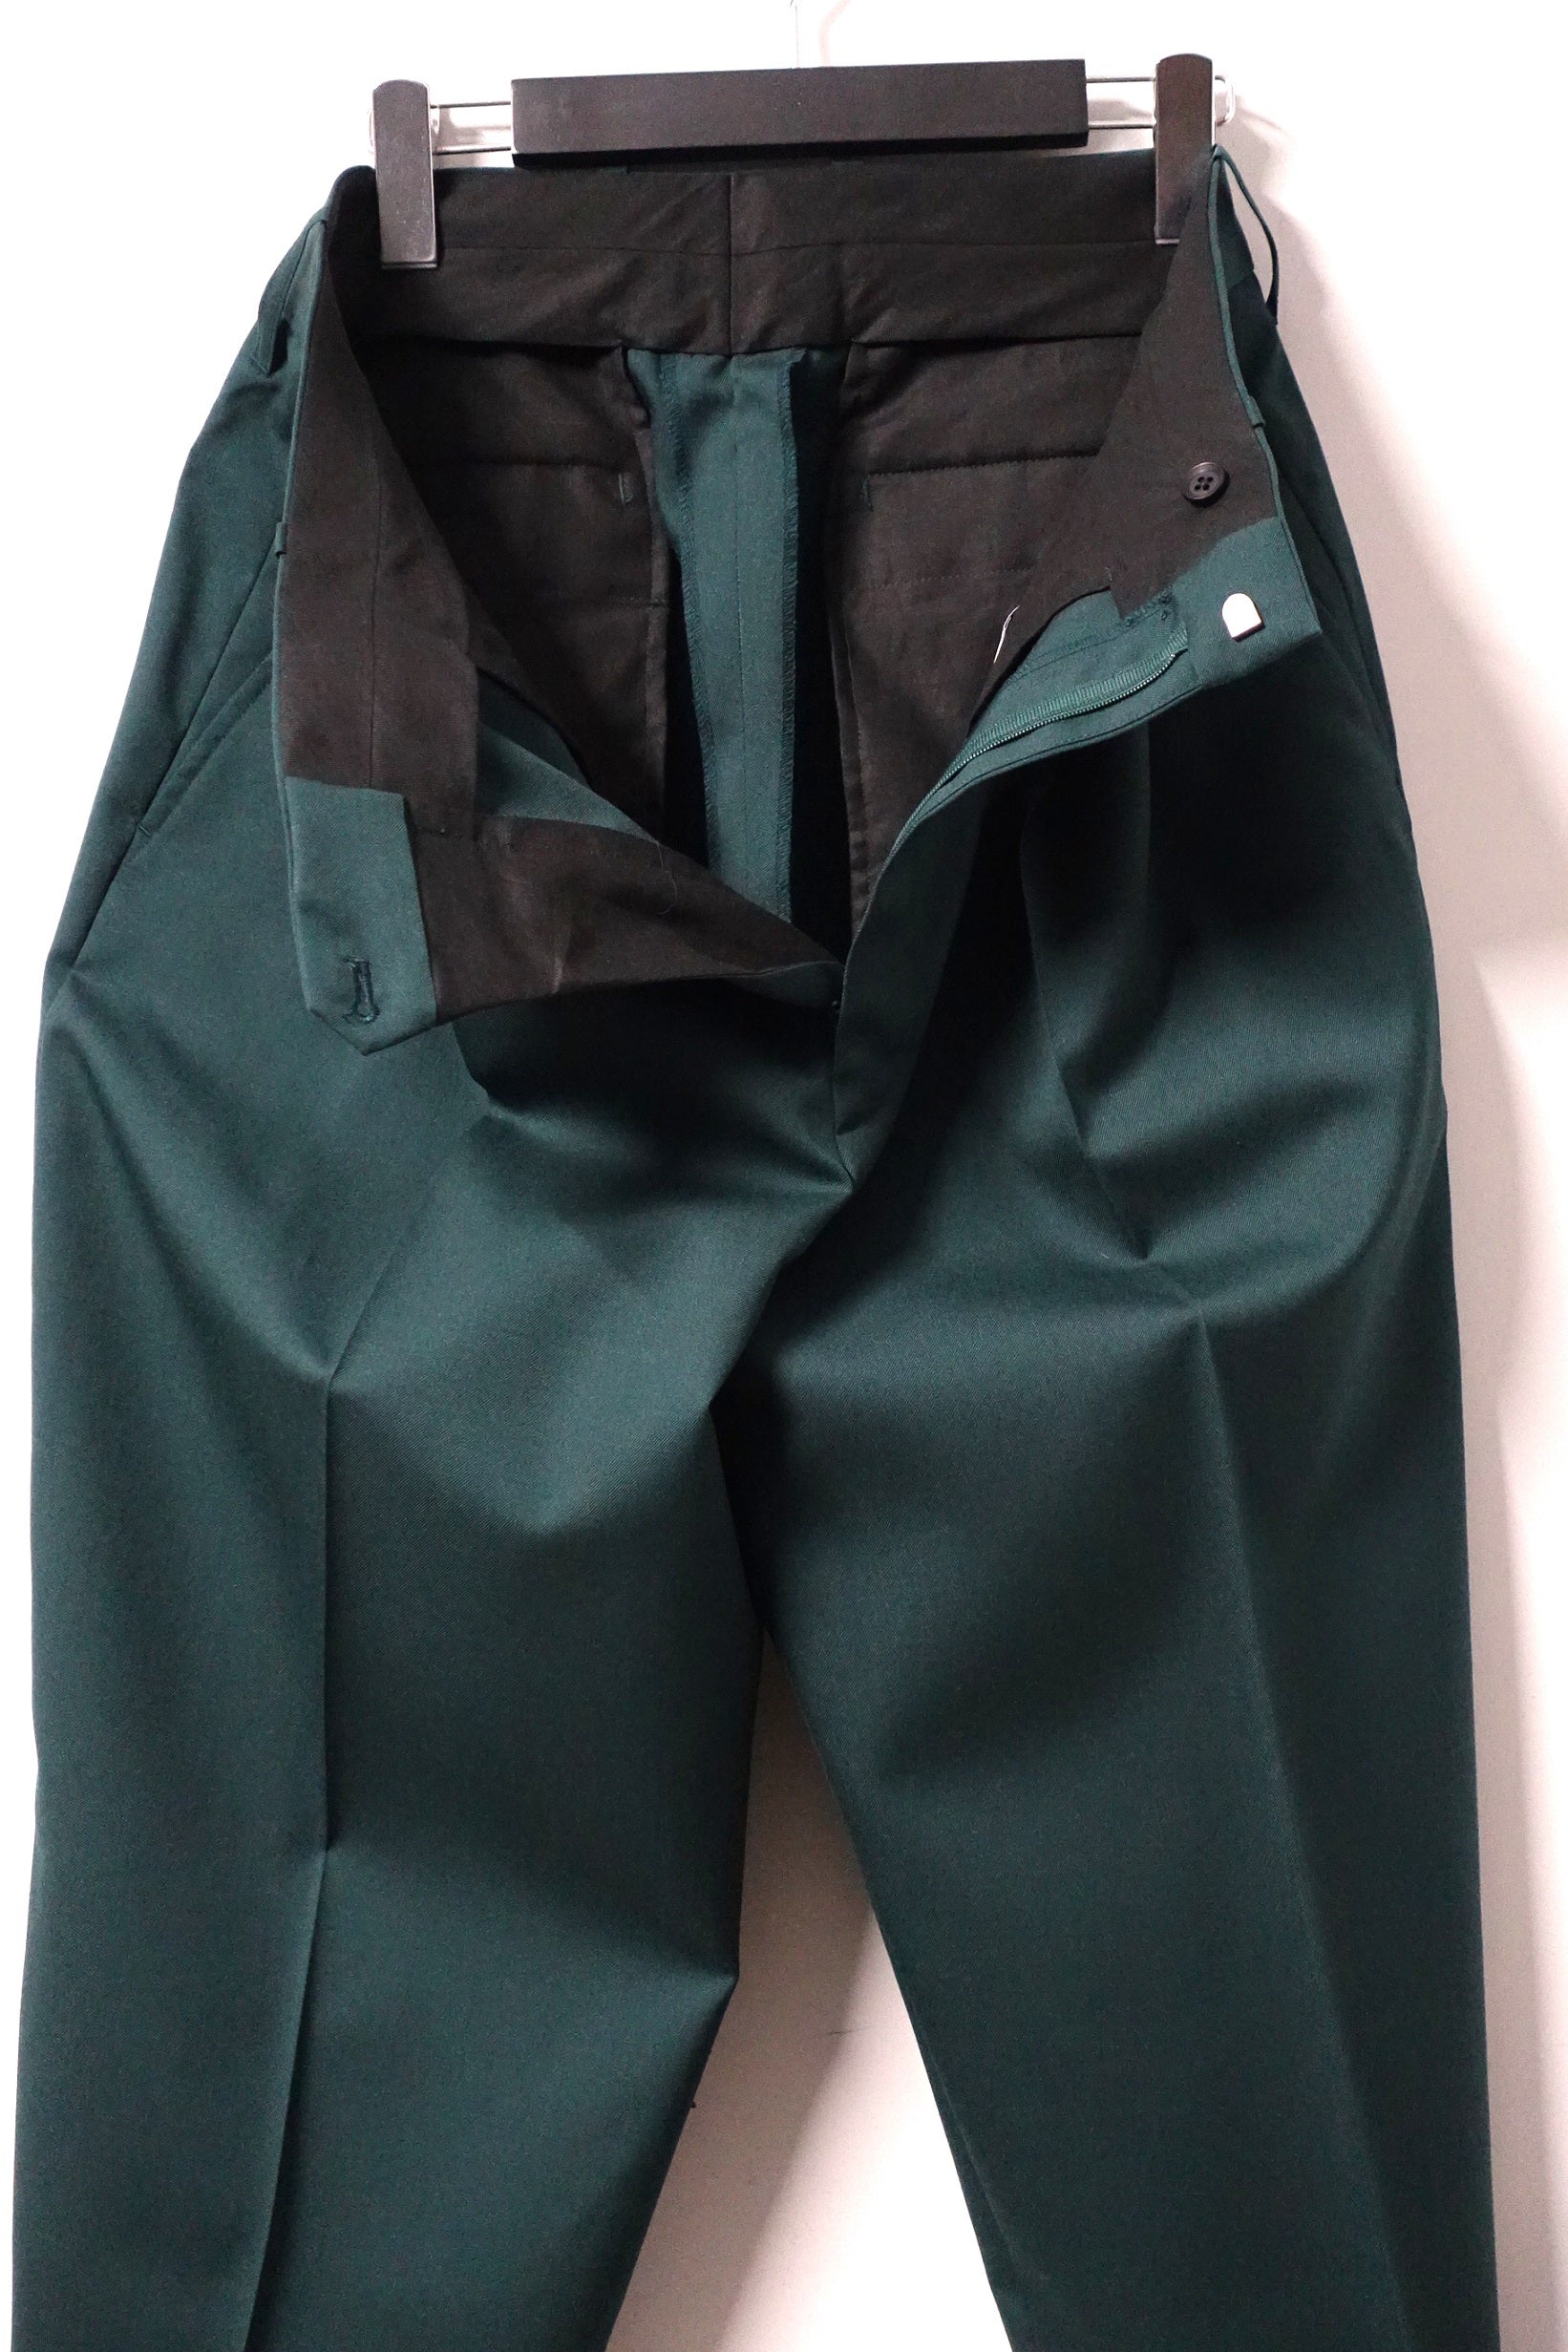 stein(シュタイン)/EX WIDE TAPERED TROUSERS/Green 通販 取り扱い-CONCRETE RIVER